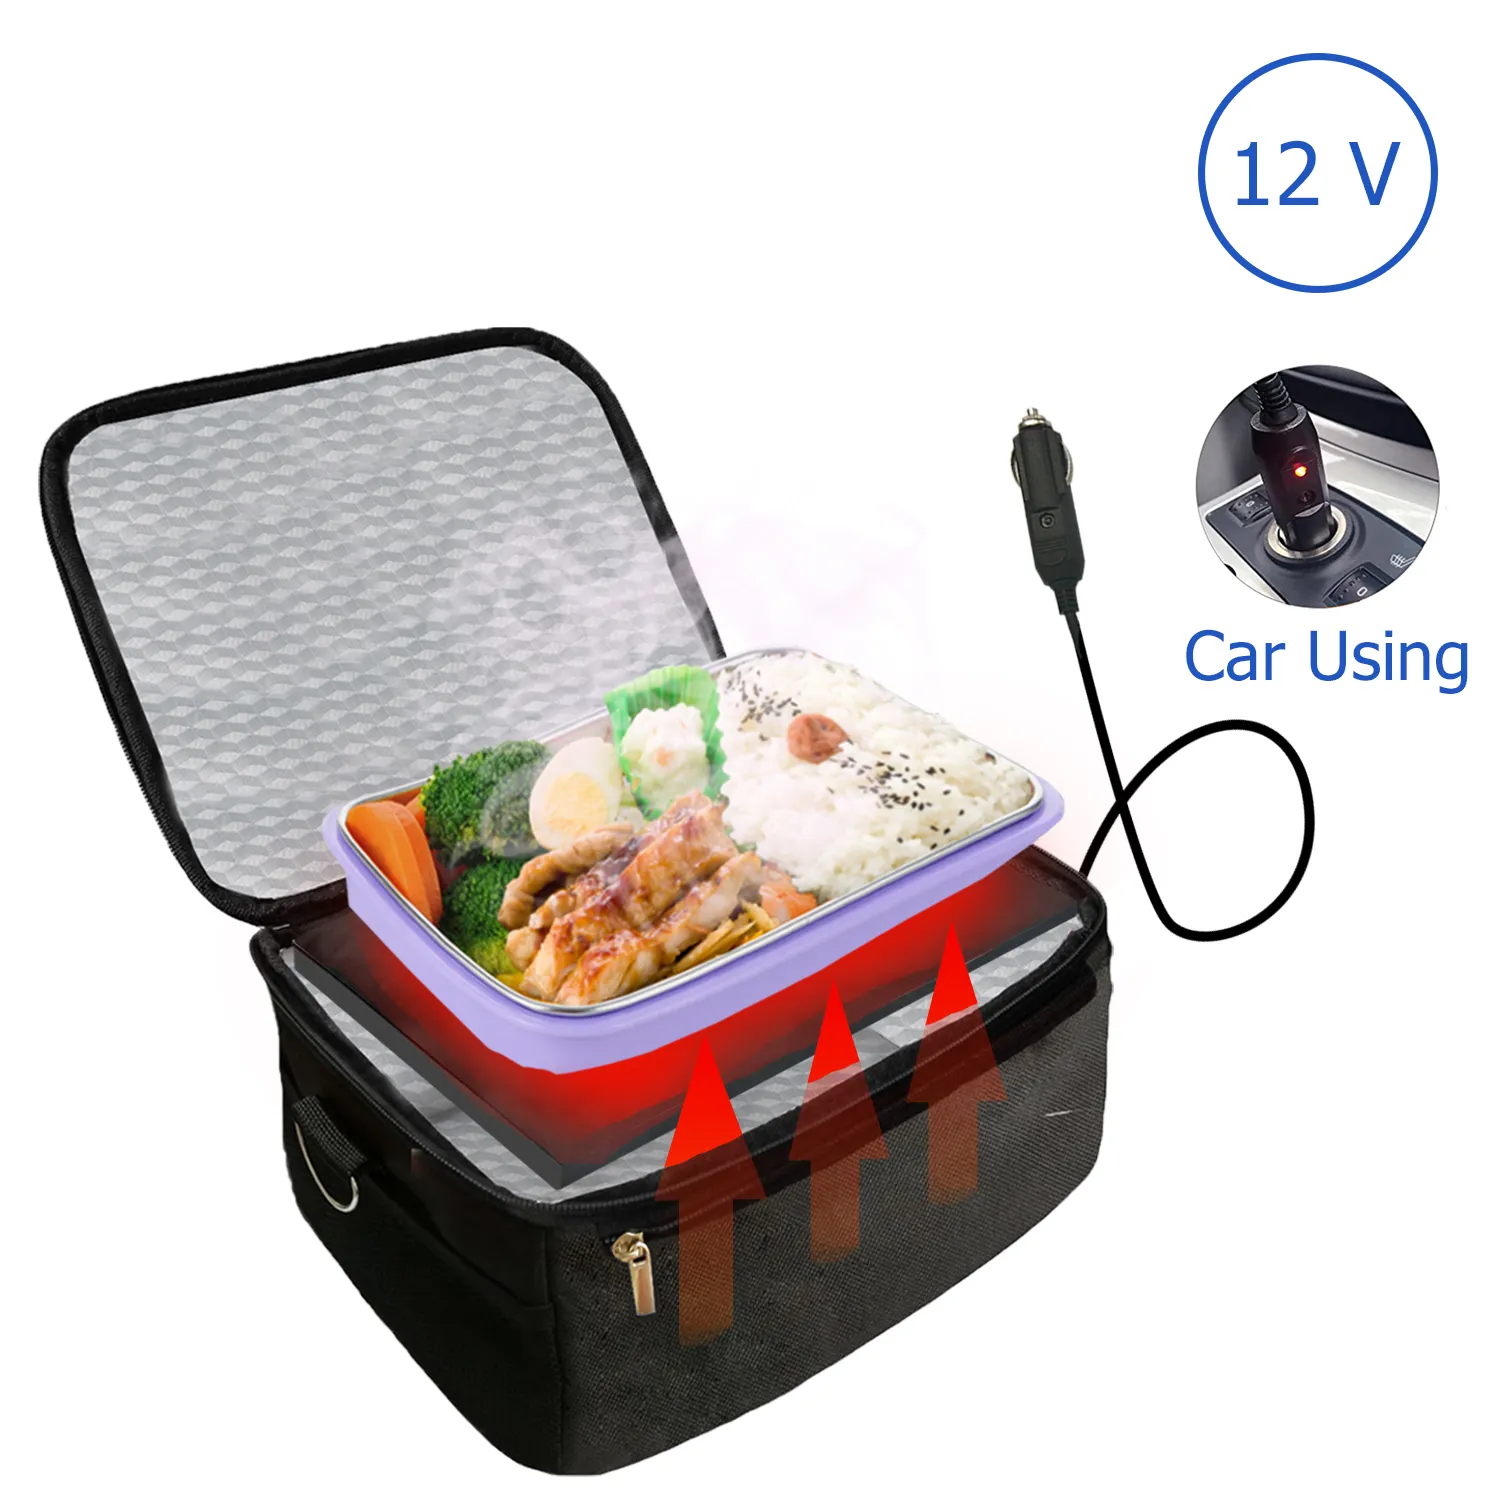 New Electric Lunch Box Car Portable Oven And Lunch Warmer Personal Heating Lunch  Box For Reheating Meals &Raw Food Cooking From Livelovelaught, $18.4